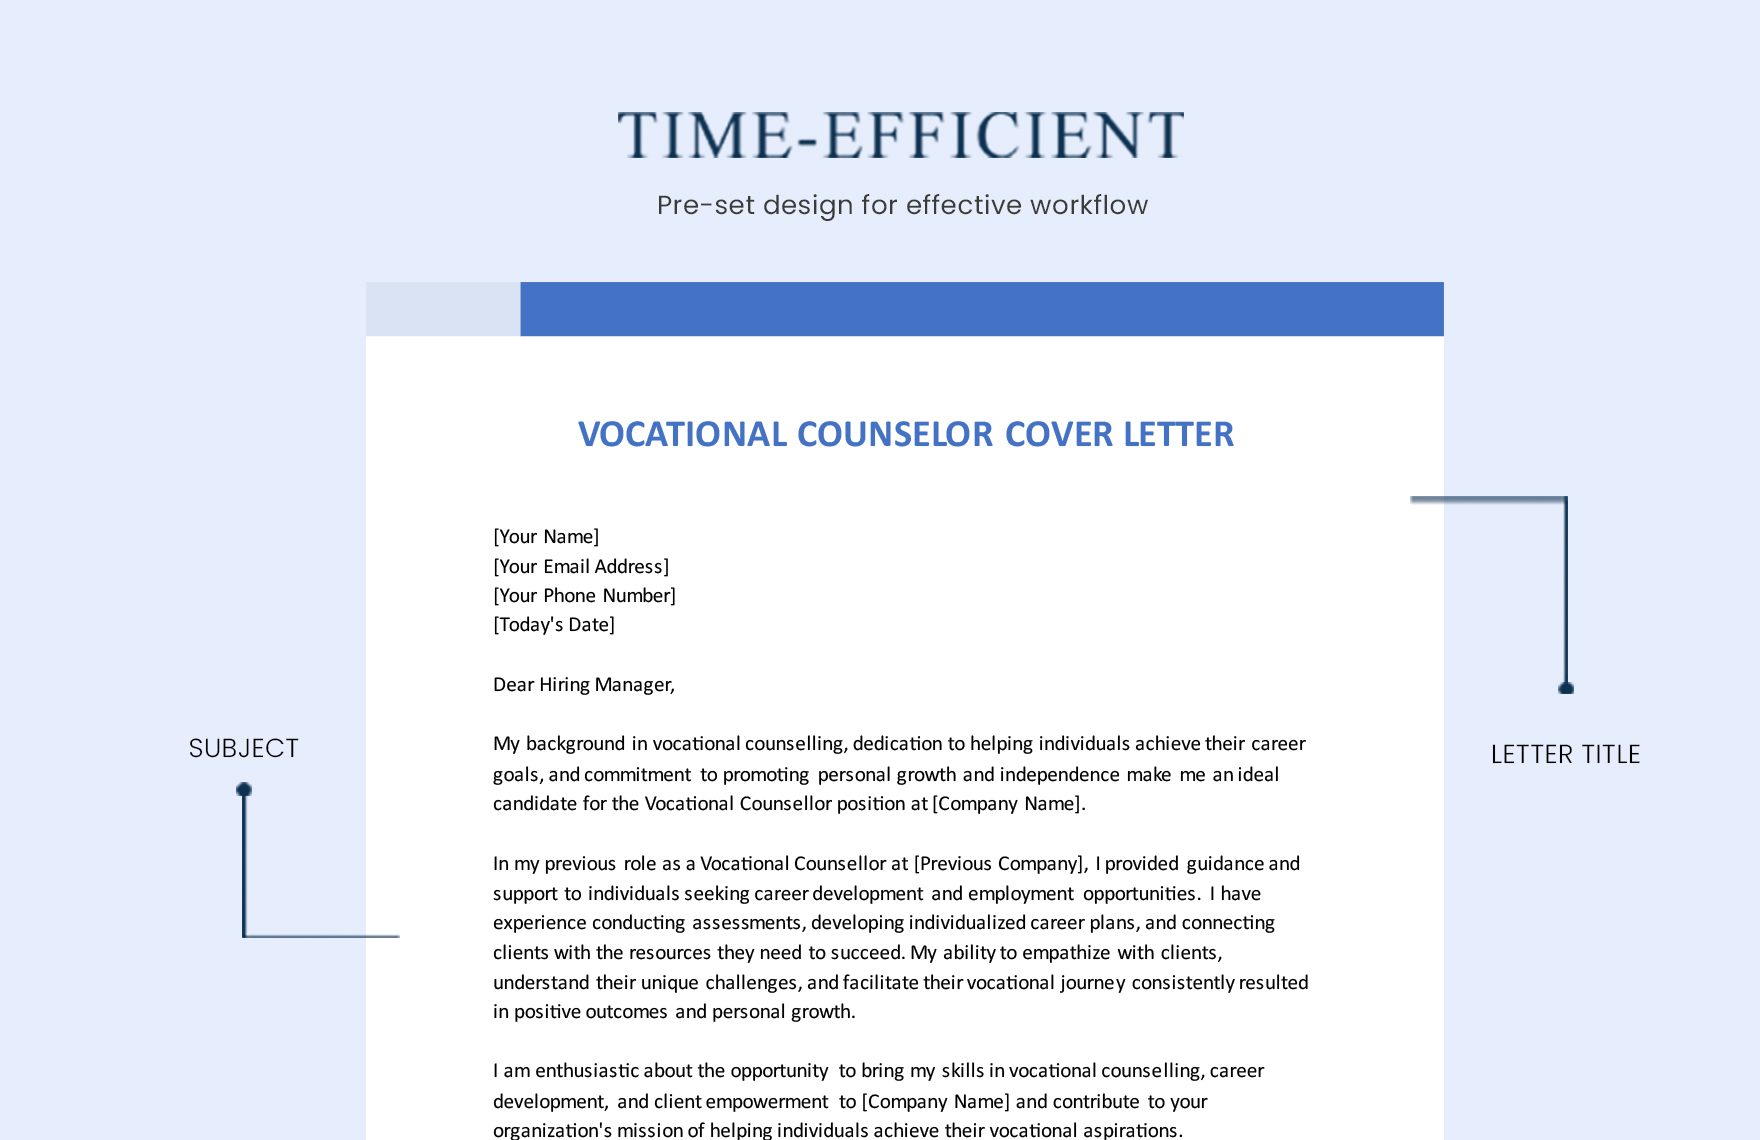 Vocational Counselor Cover Letter